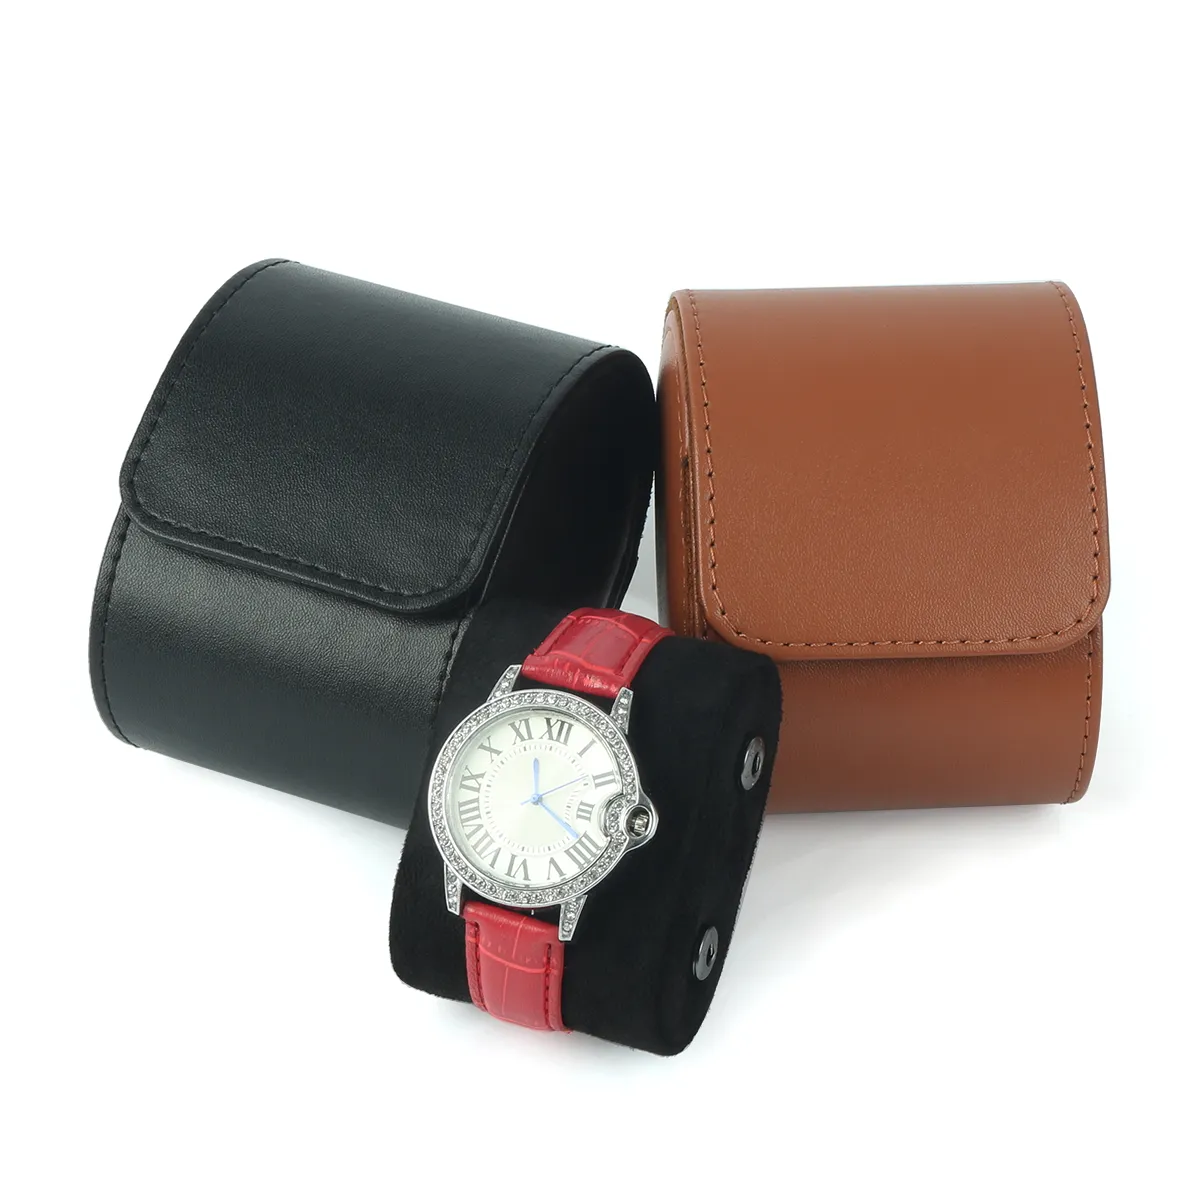 New Arrival Travel Storage Watch Roll Leather Roll Watch Leather Watch Case Box